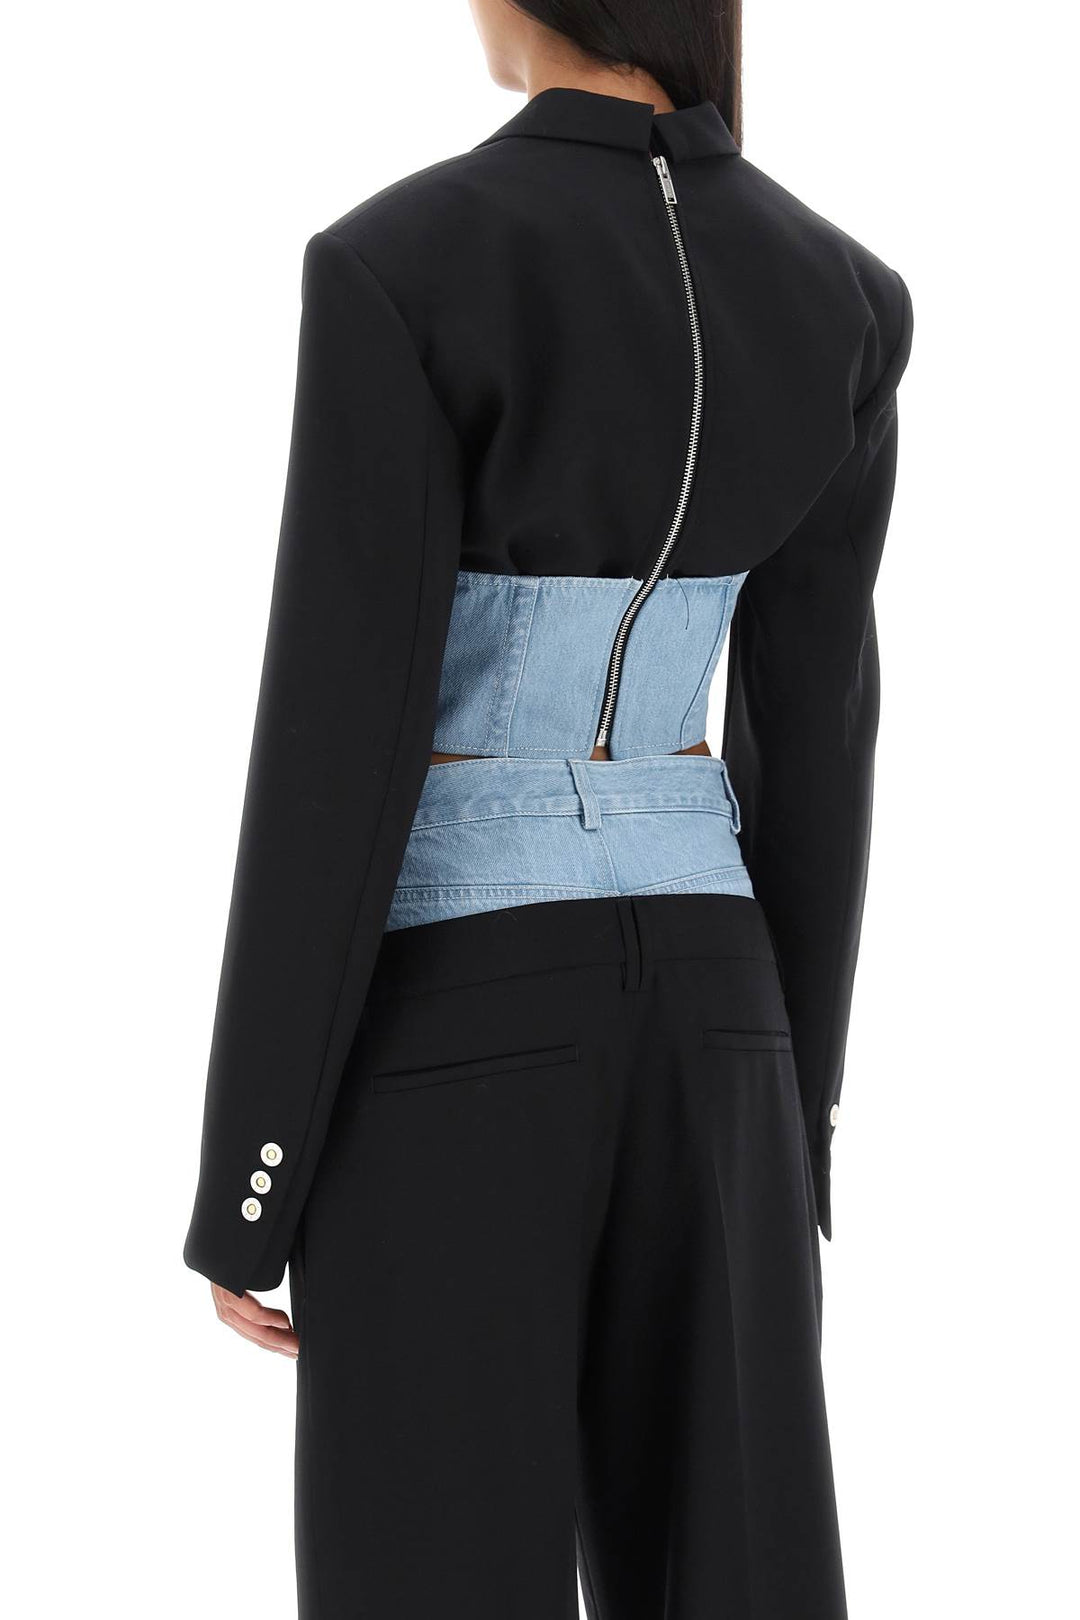 Giacca Corsetto - Dion Lee - Donna